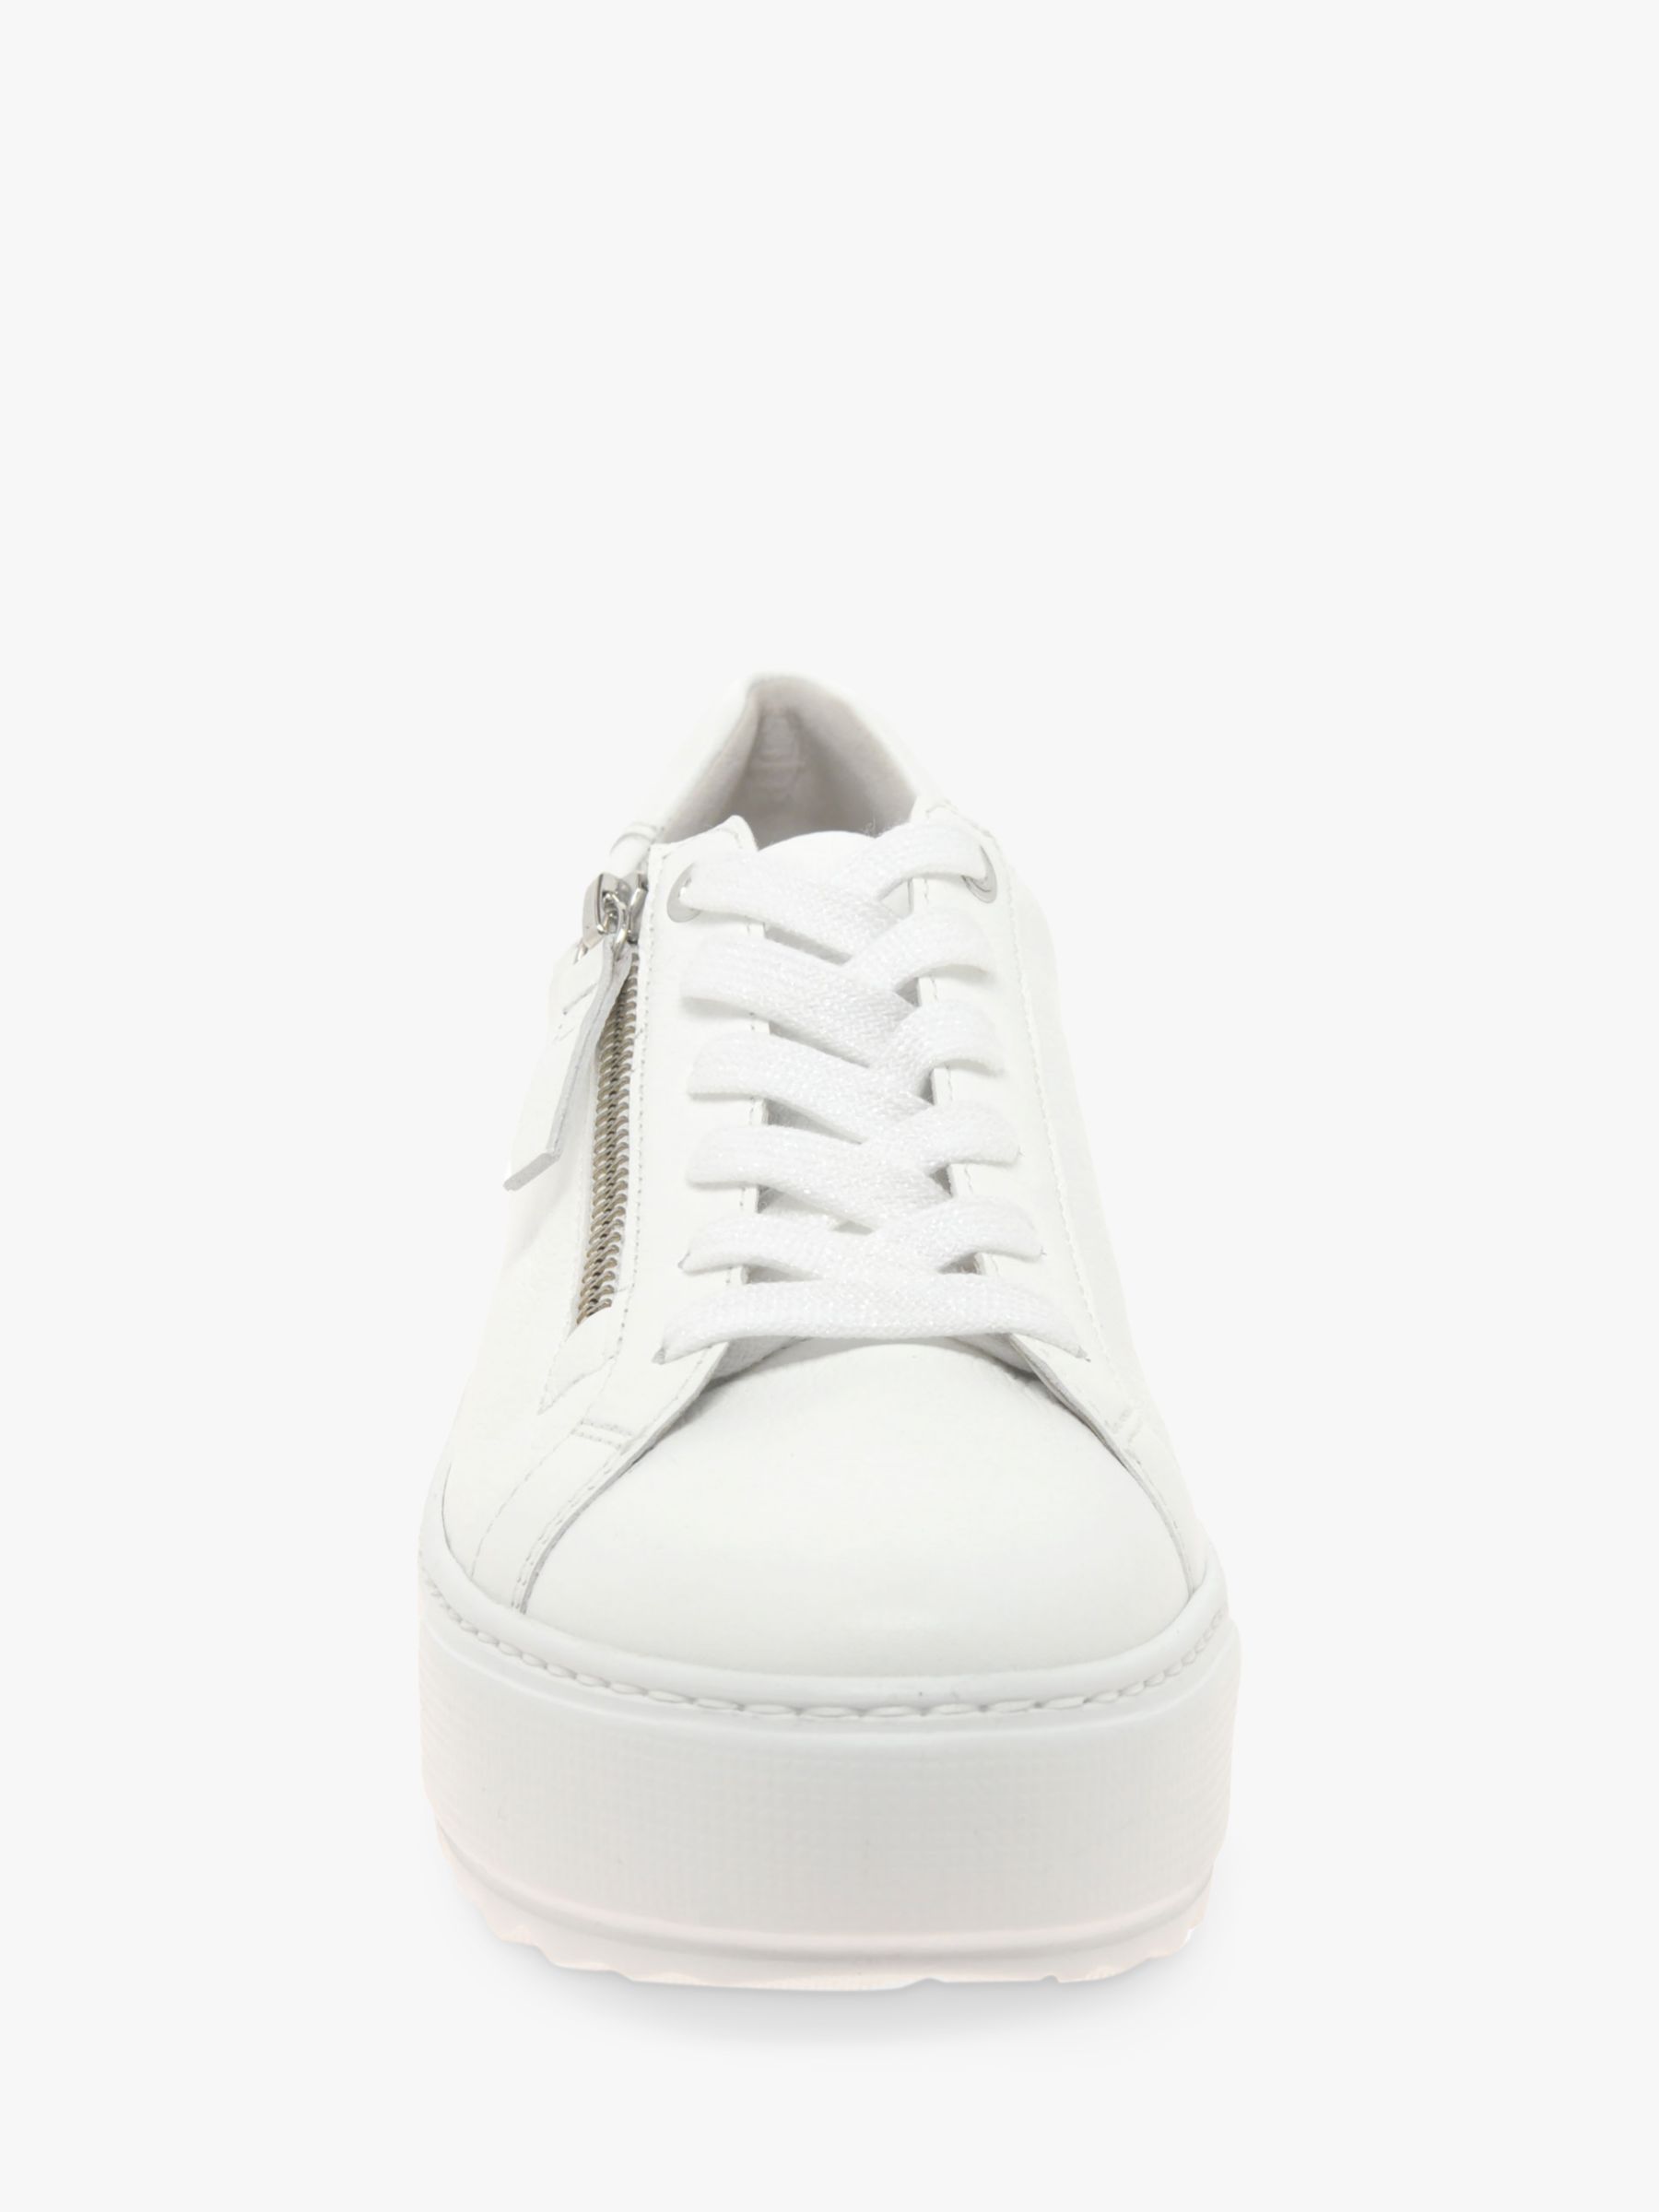 Gabor Heather Wide Fit Leather Flatform Trainers, White at John Lewis ...